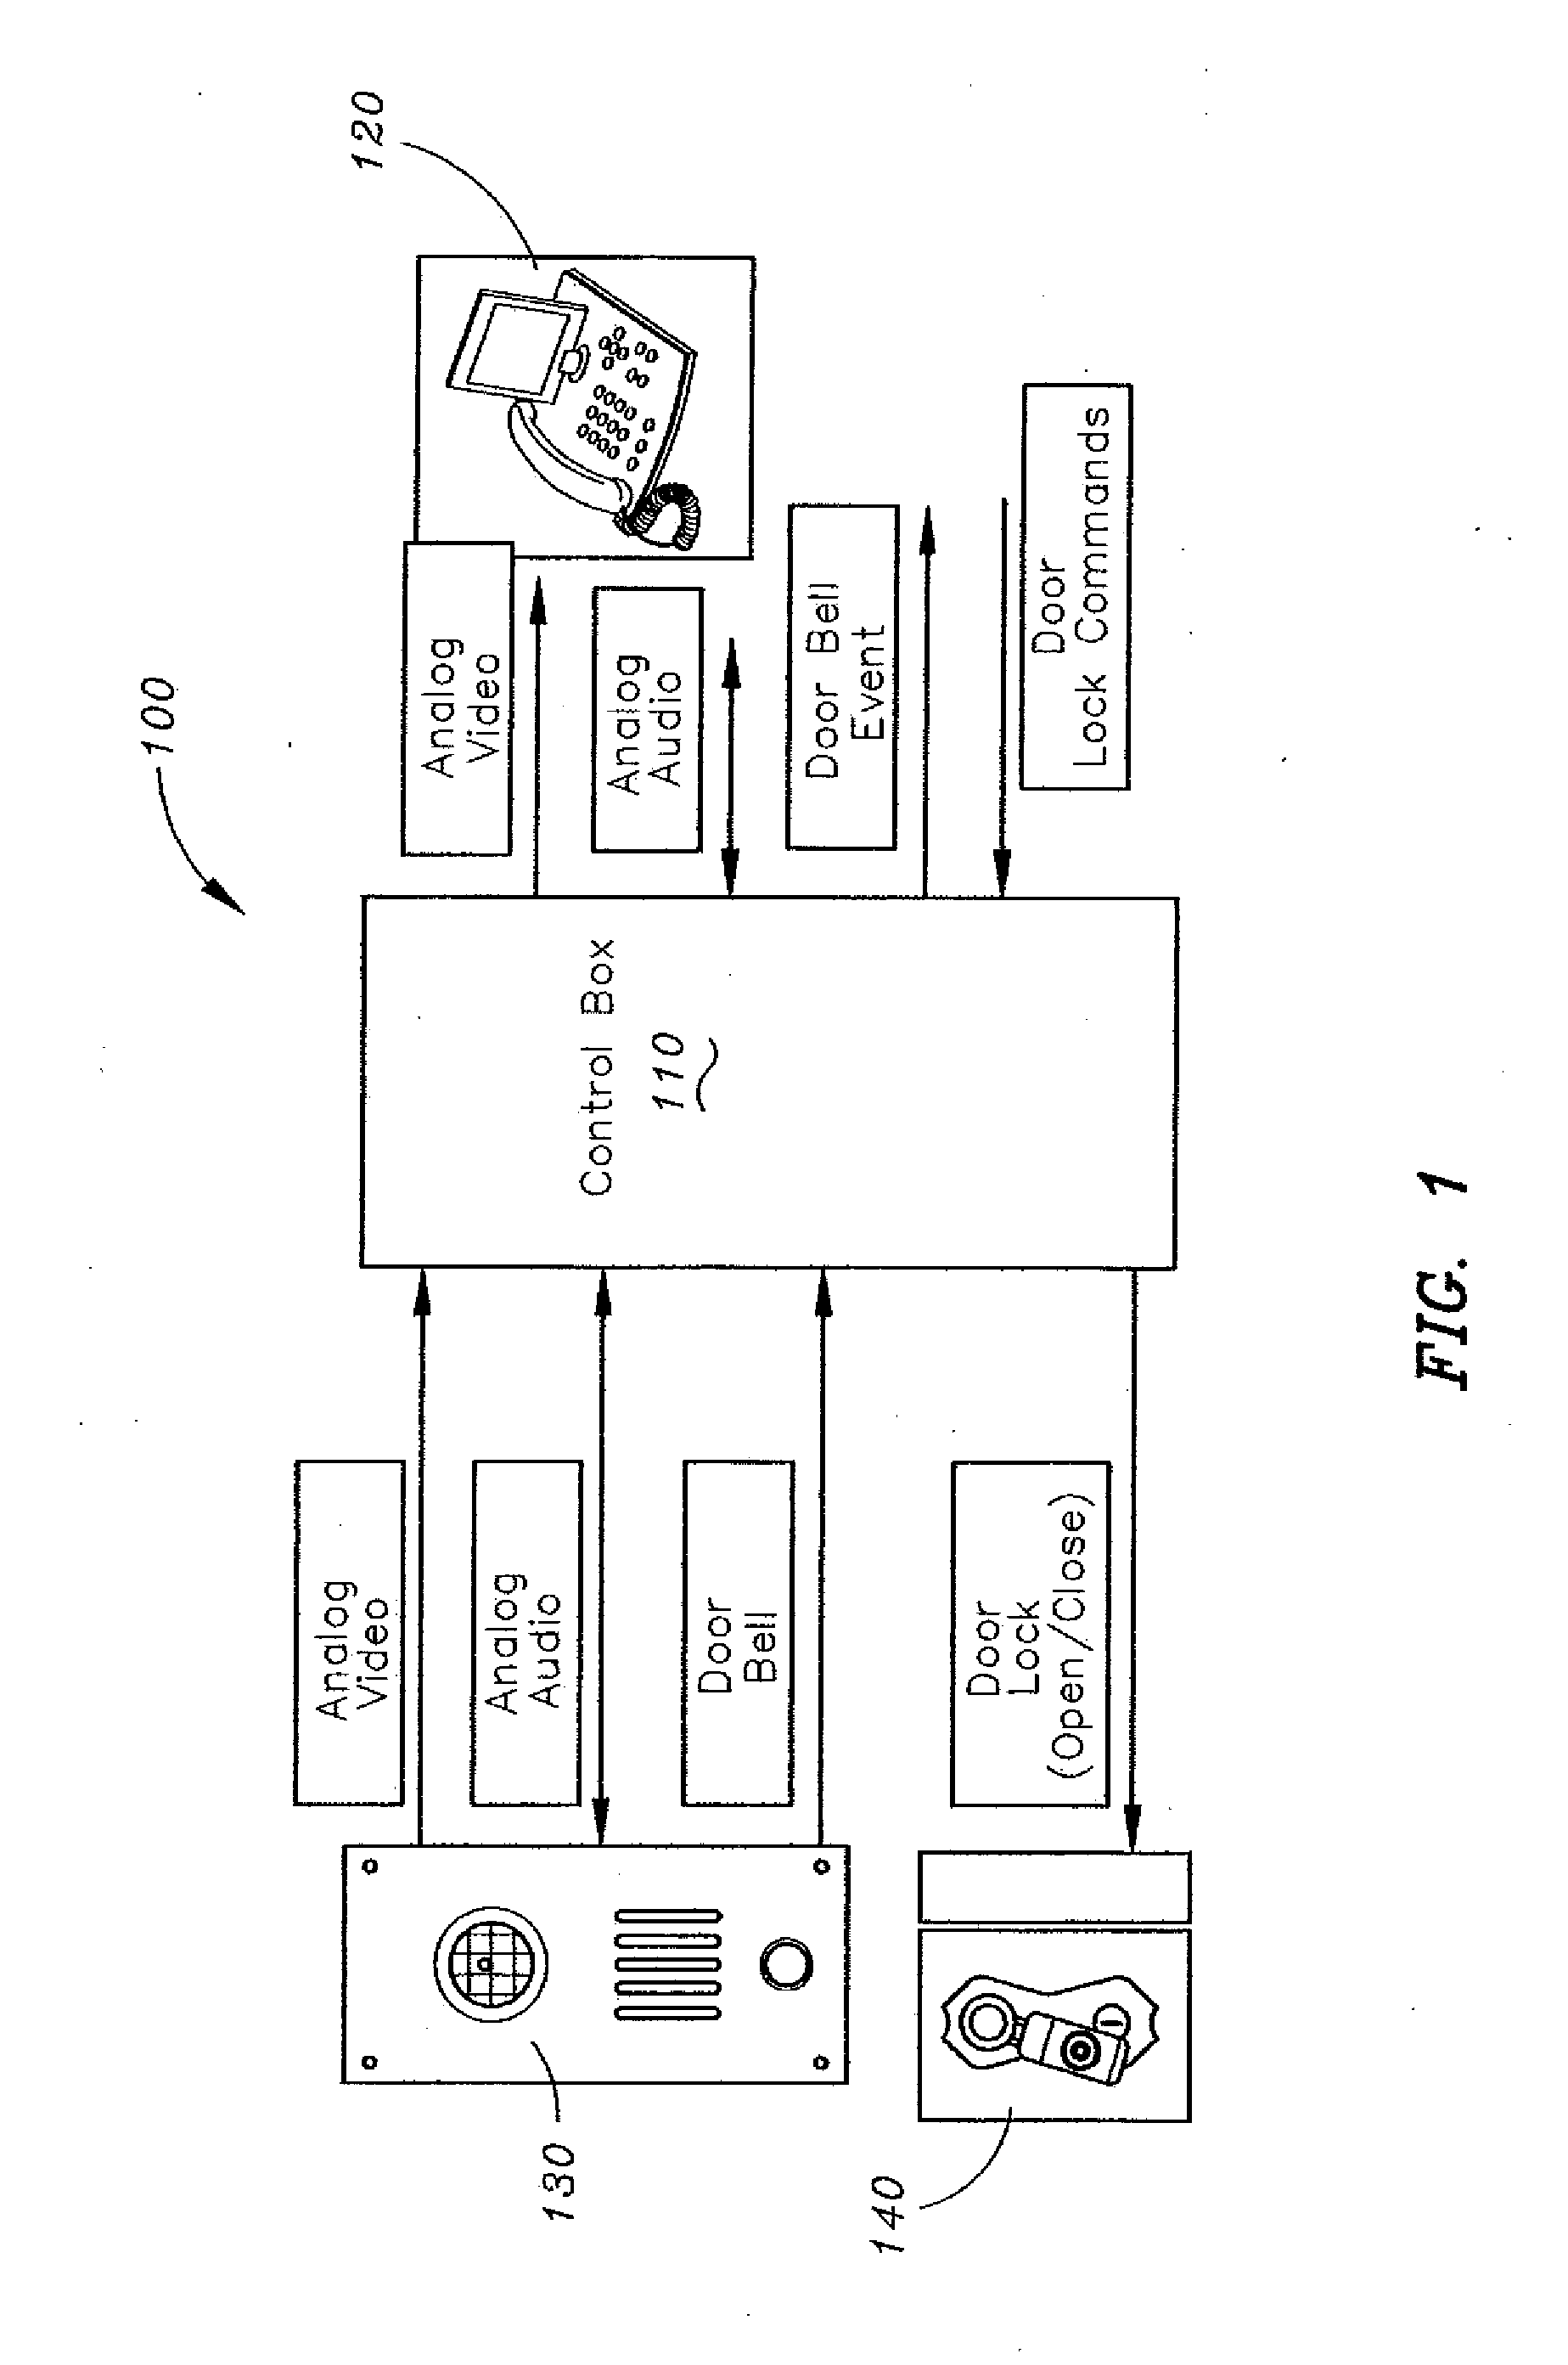 Method and apparatus for unlocking/locking a door and enabling two-way communications with a door security system via a smart phone